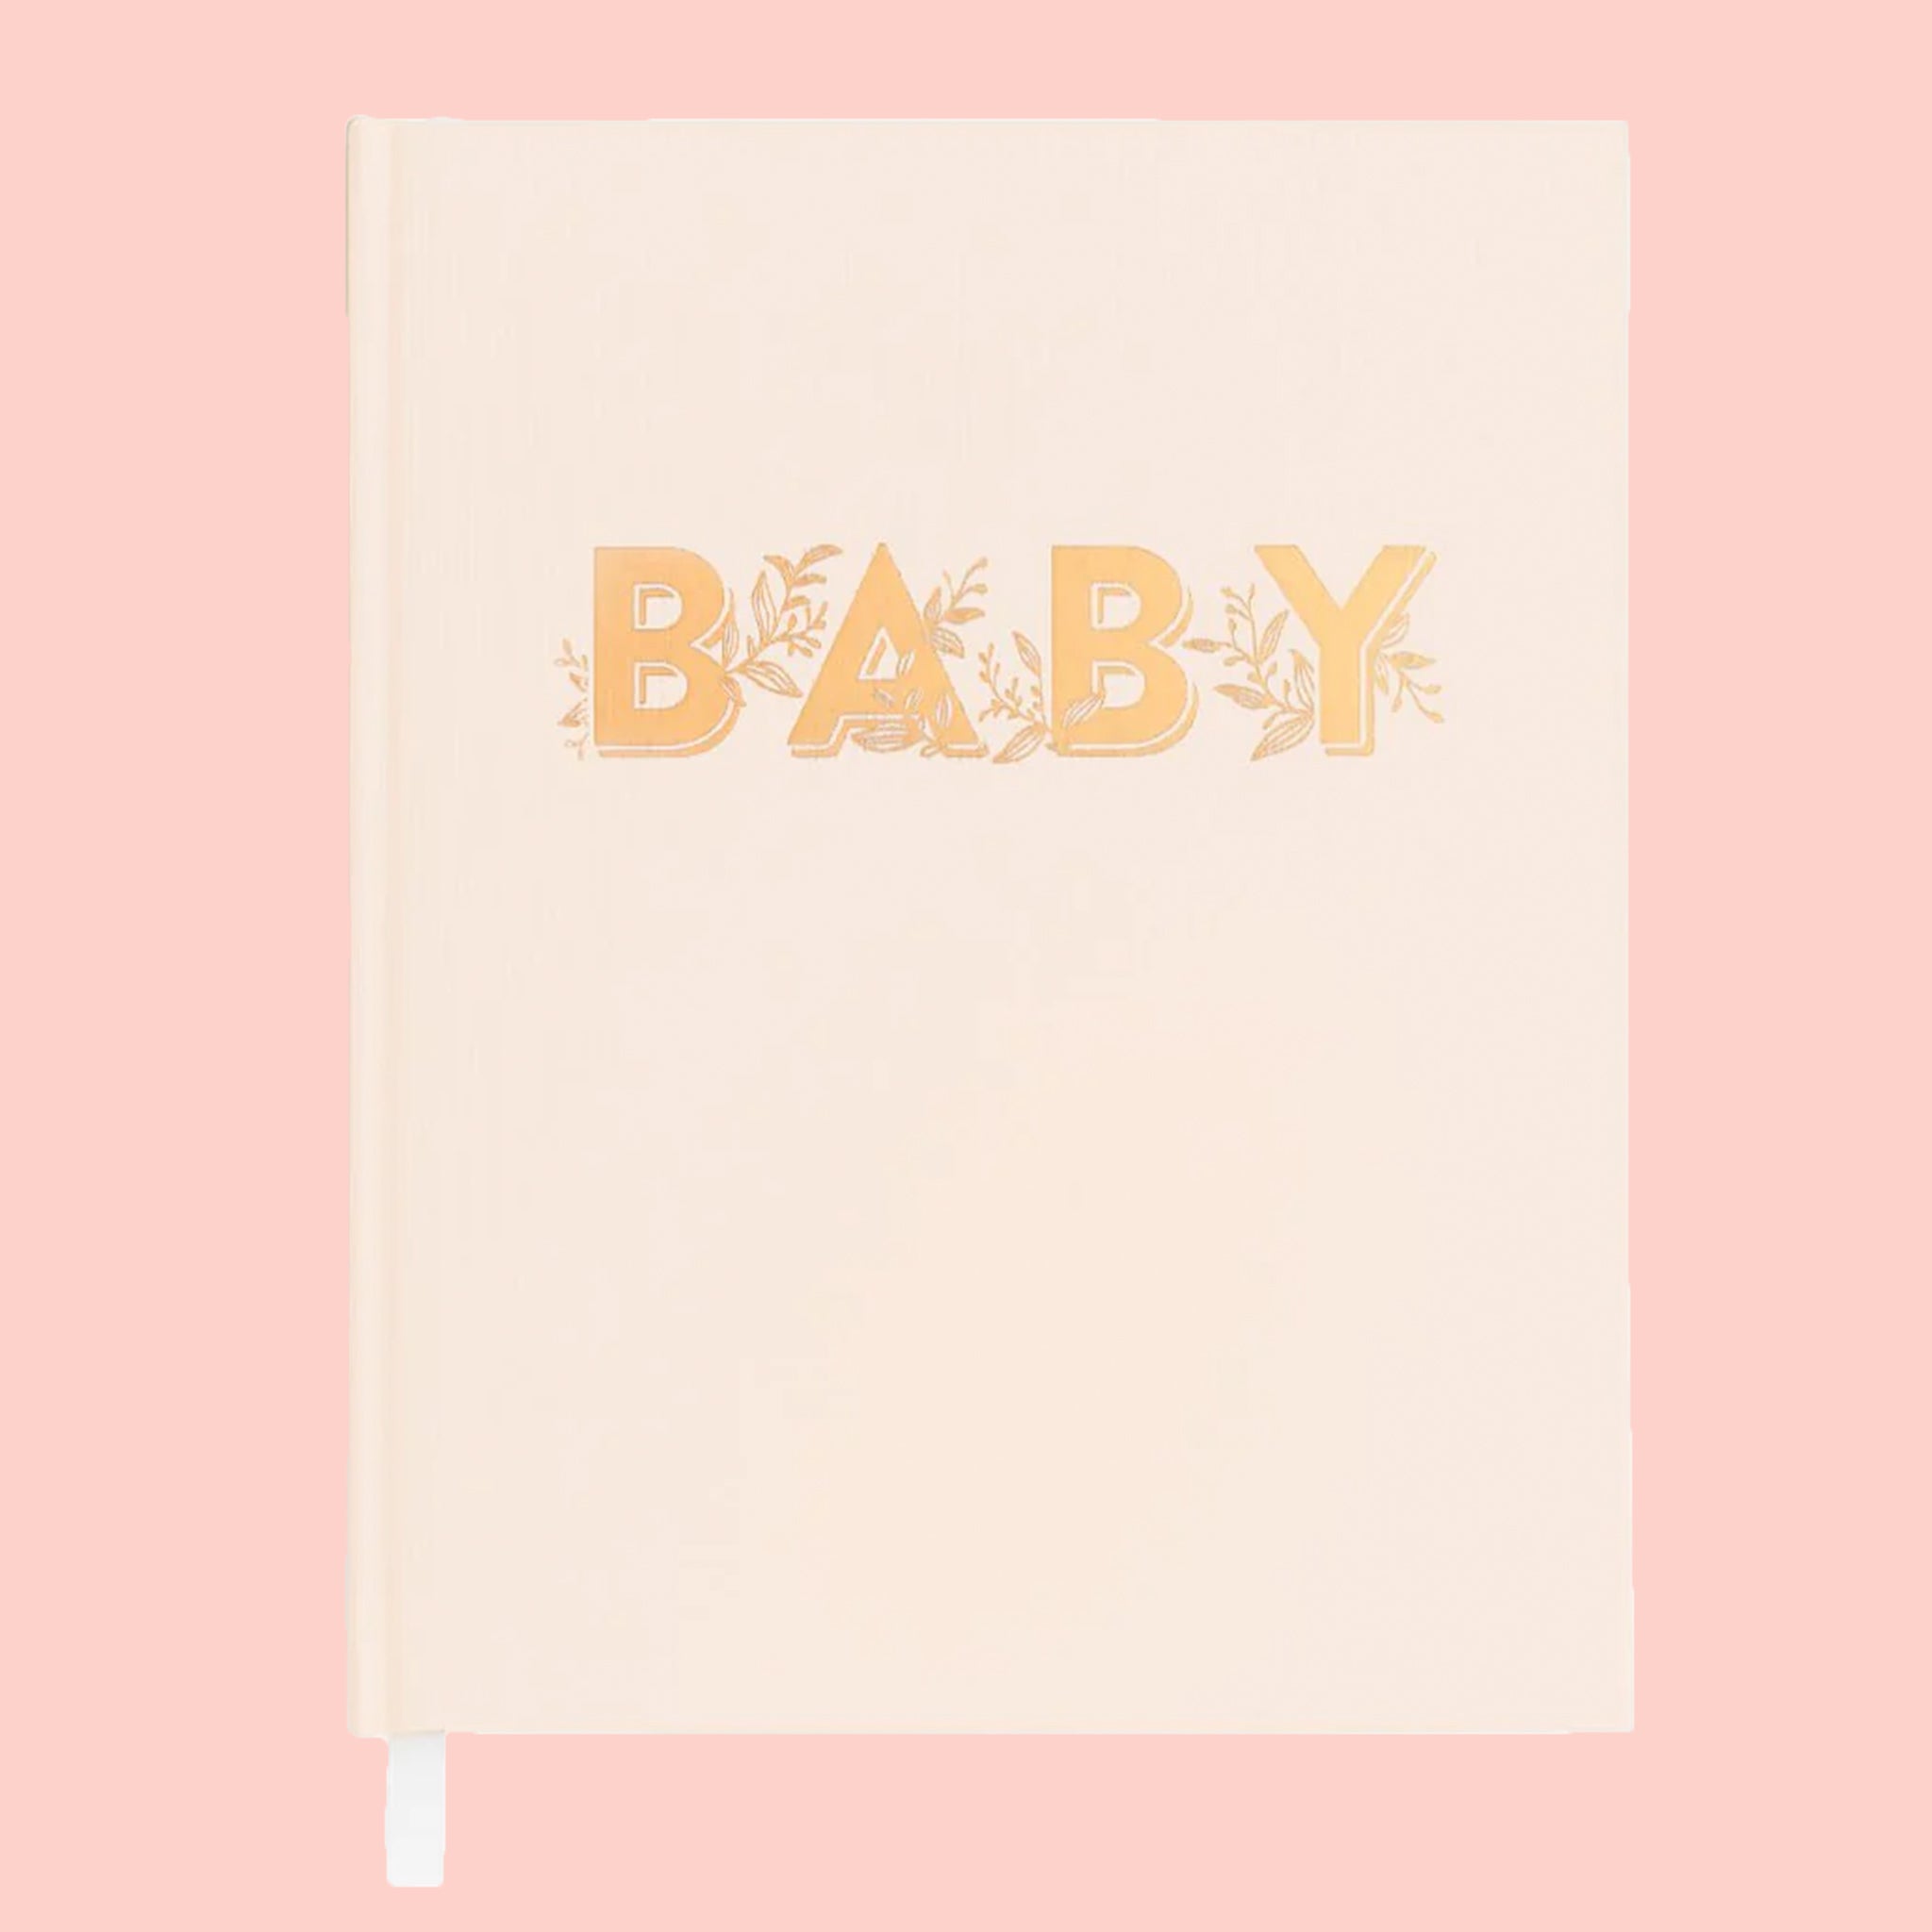 A neutral book cover with gold foil text on the front that reads, "BABY".